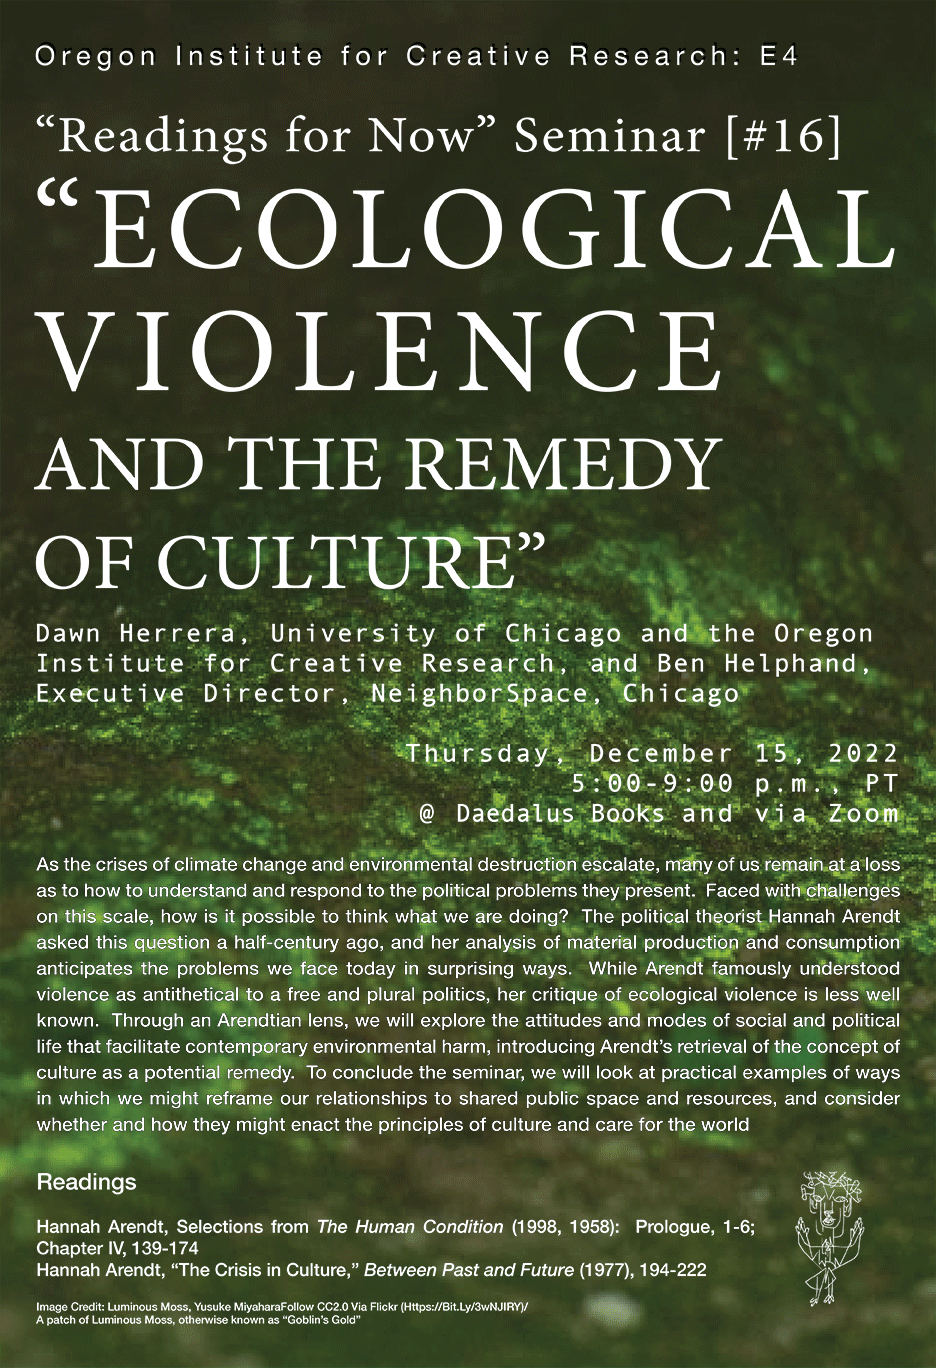 #16: Ecological Violence and the Remedy of Culture